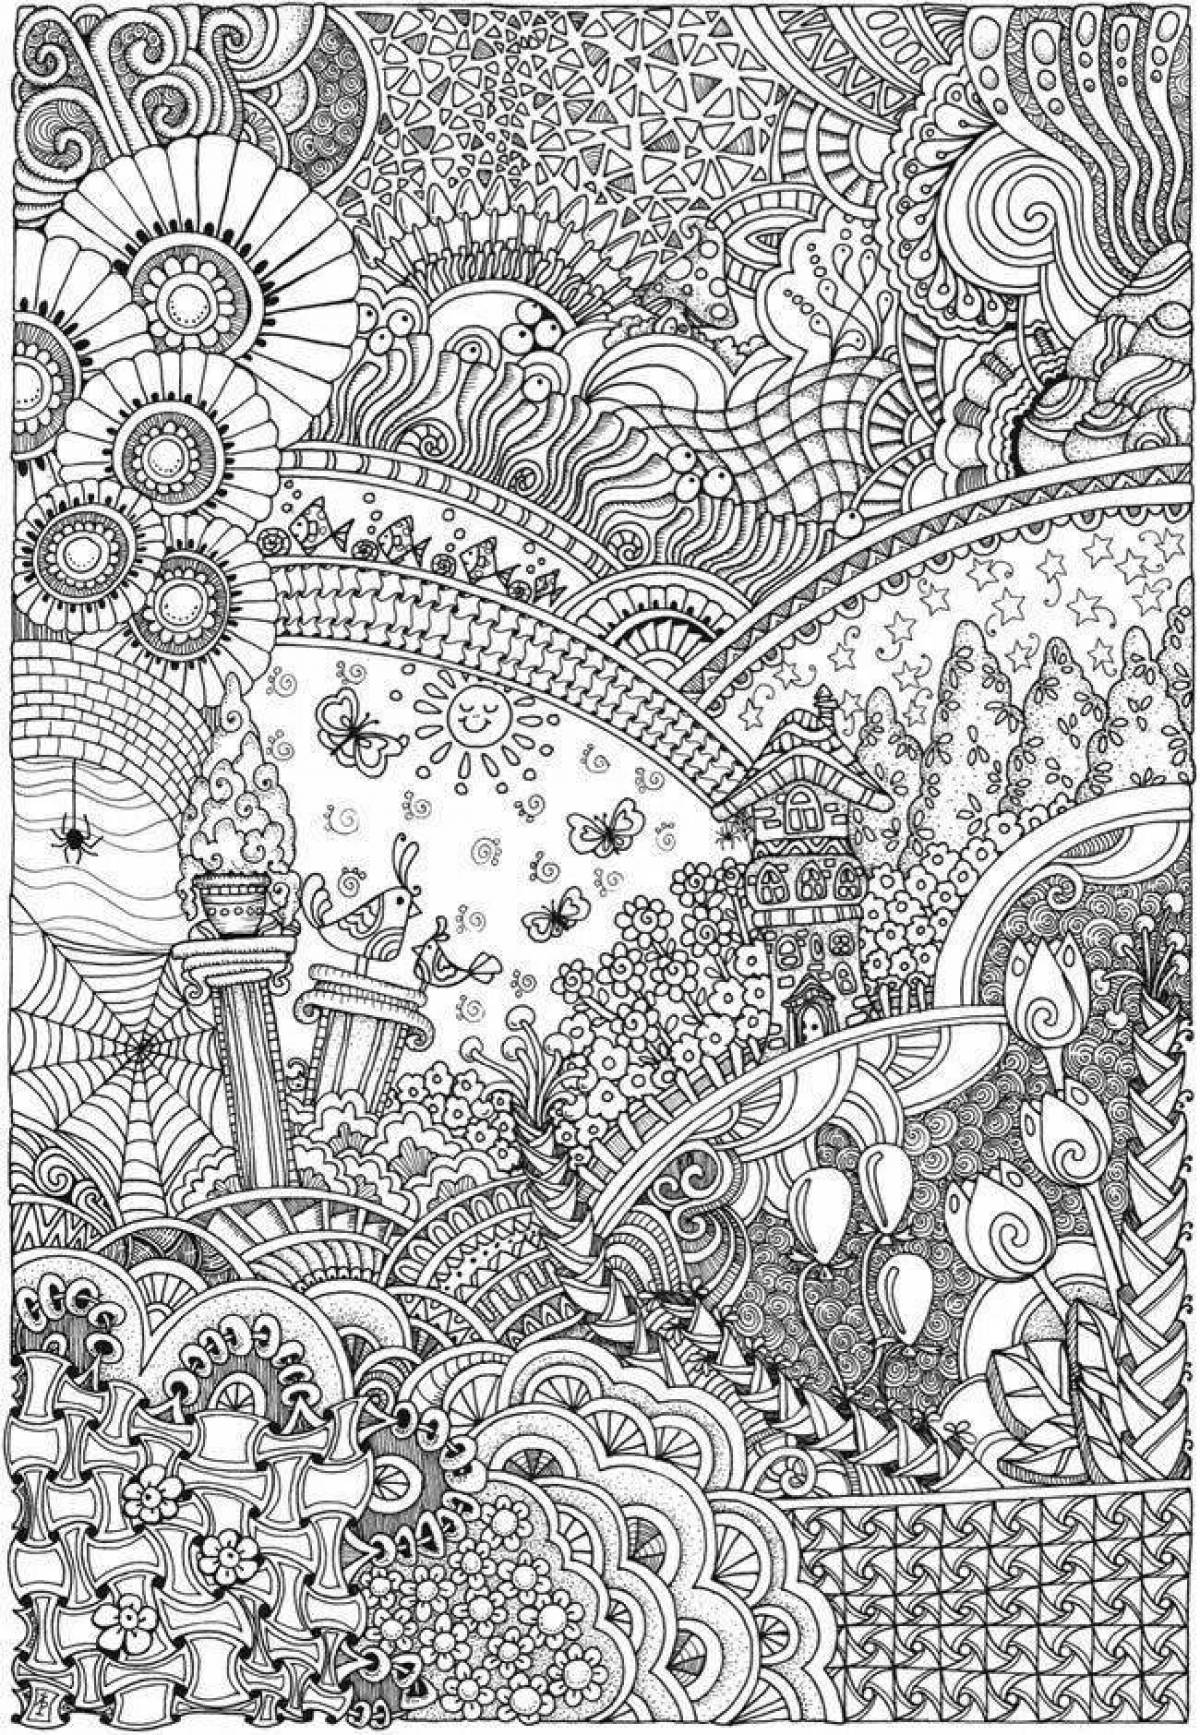 Charming coloring meditation page